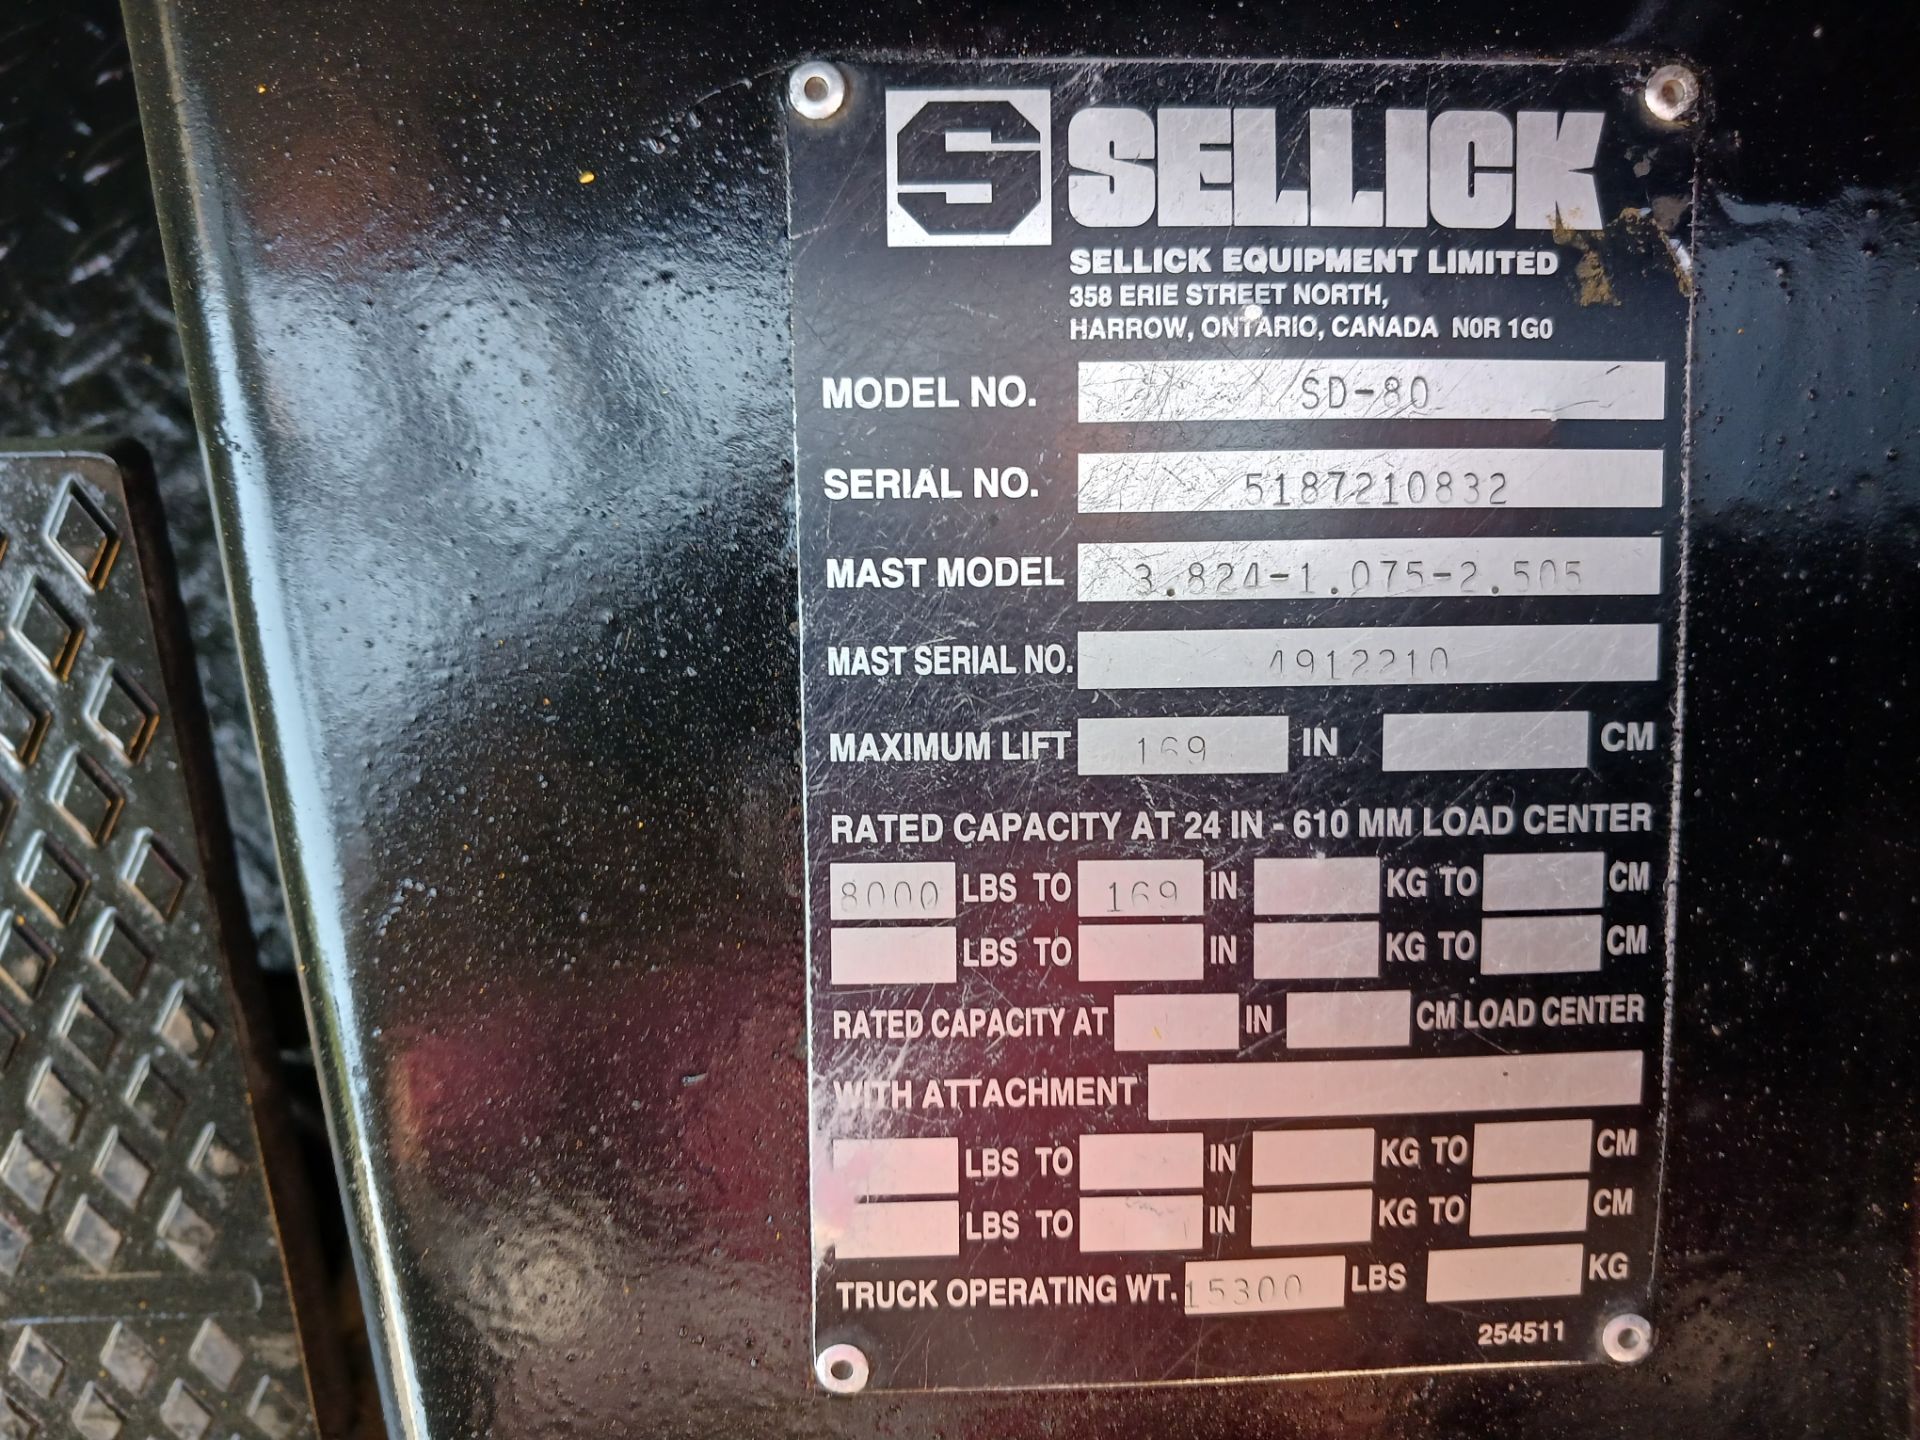 Sellick SD-80 8,000 lb Forklift - Lester, PA - Image 14 of 14